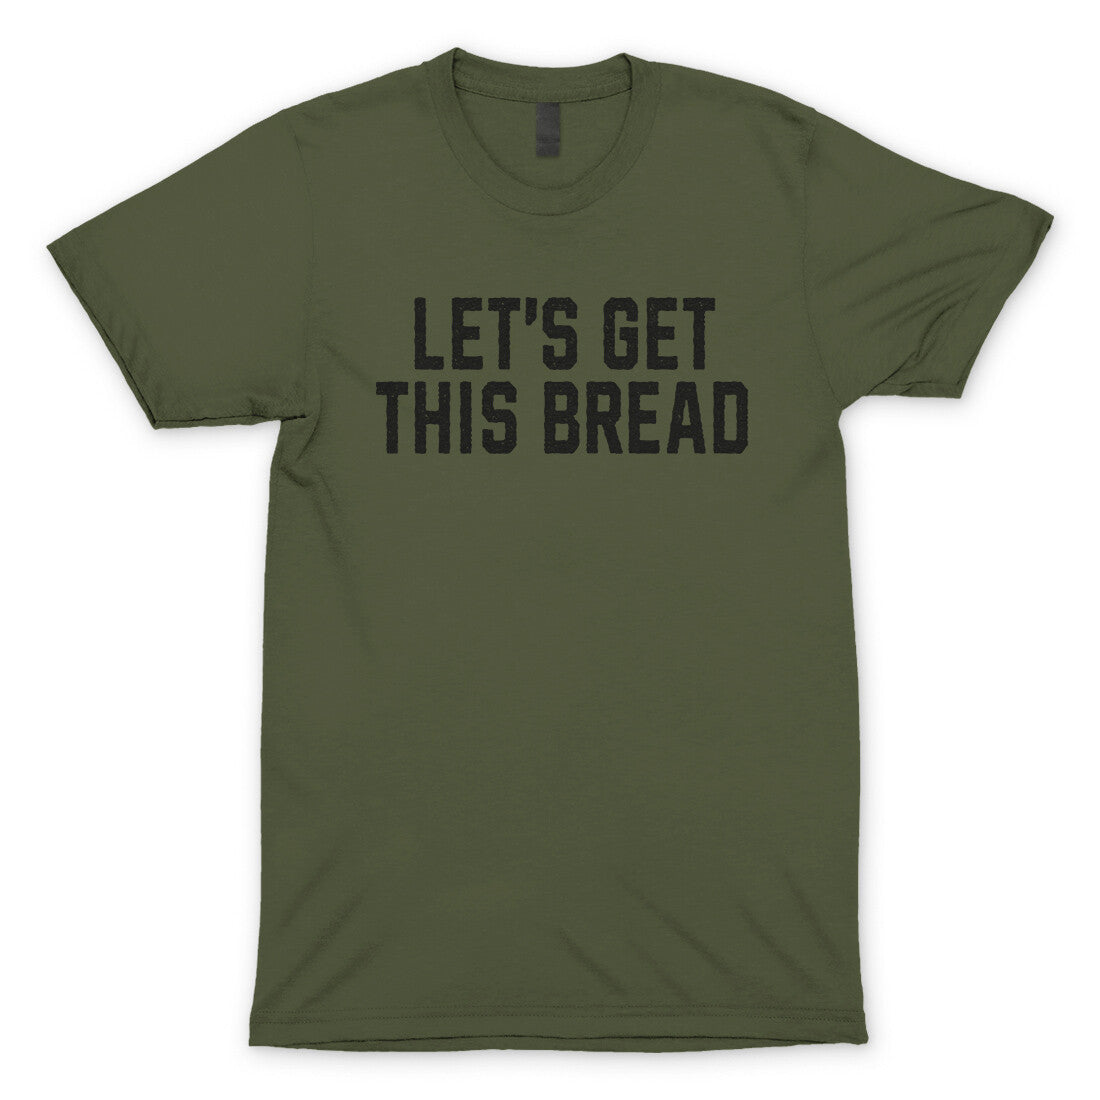 Let's Get This Bread in Military Green Color